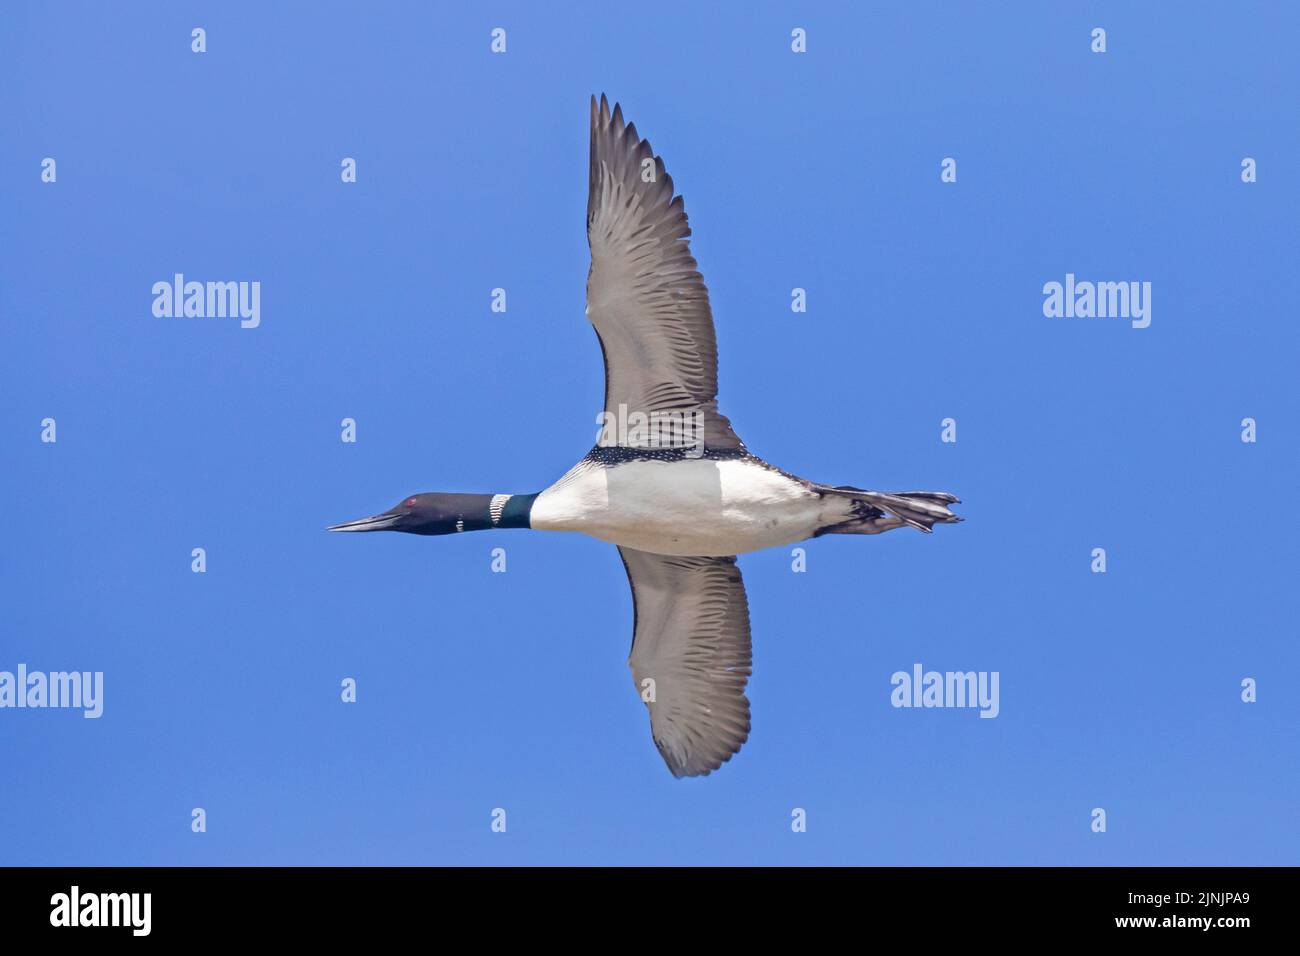 great northern diver (Gavia immer), in flight in the blue sky, view from below, Canada, Manitoba, Riding Mountain National Park Stock Photo